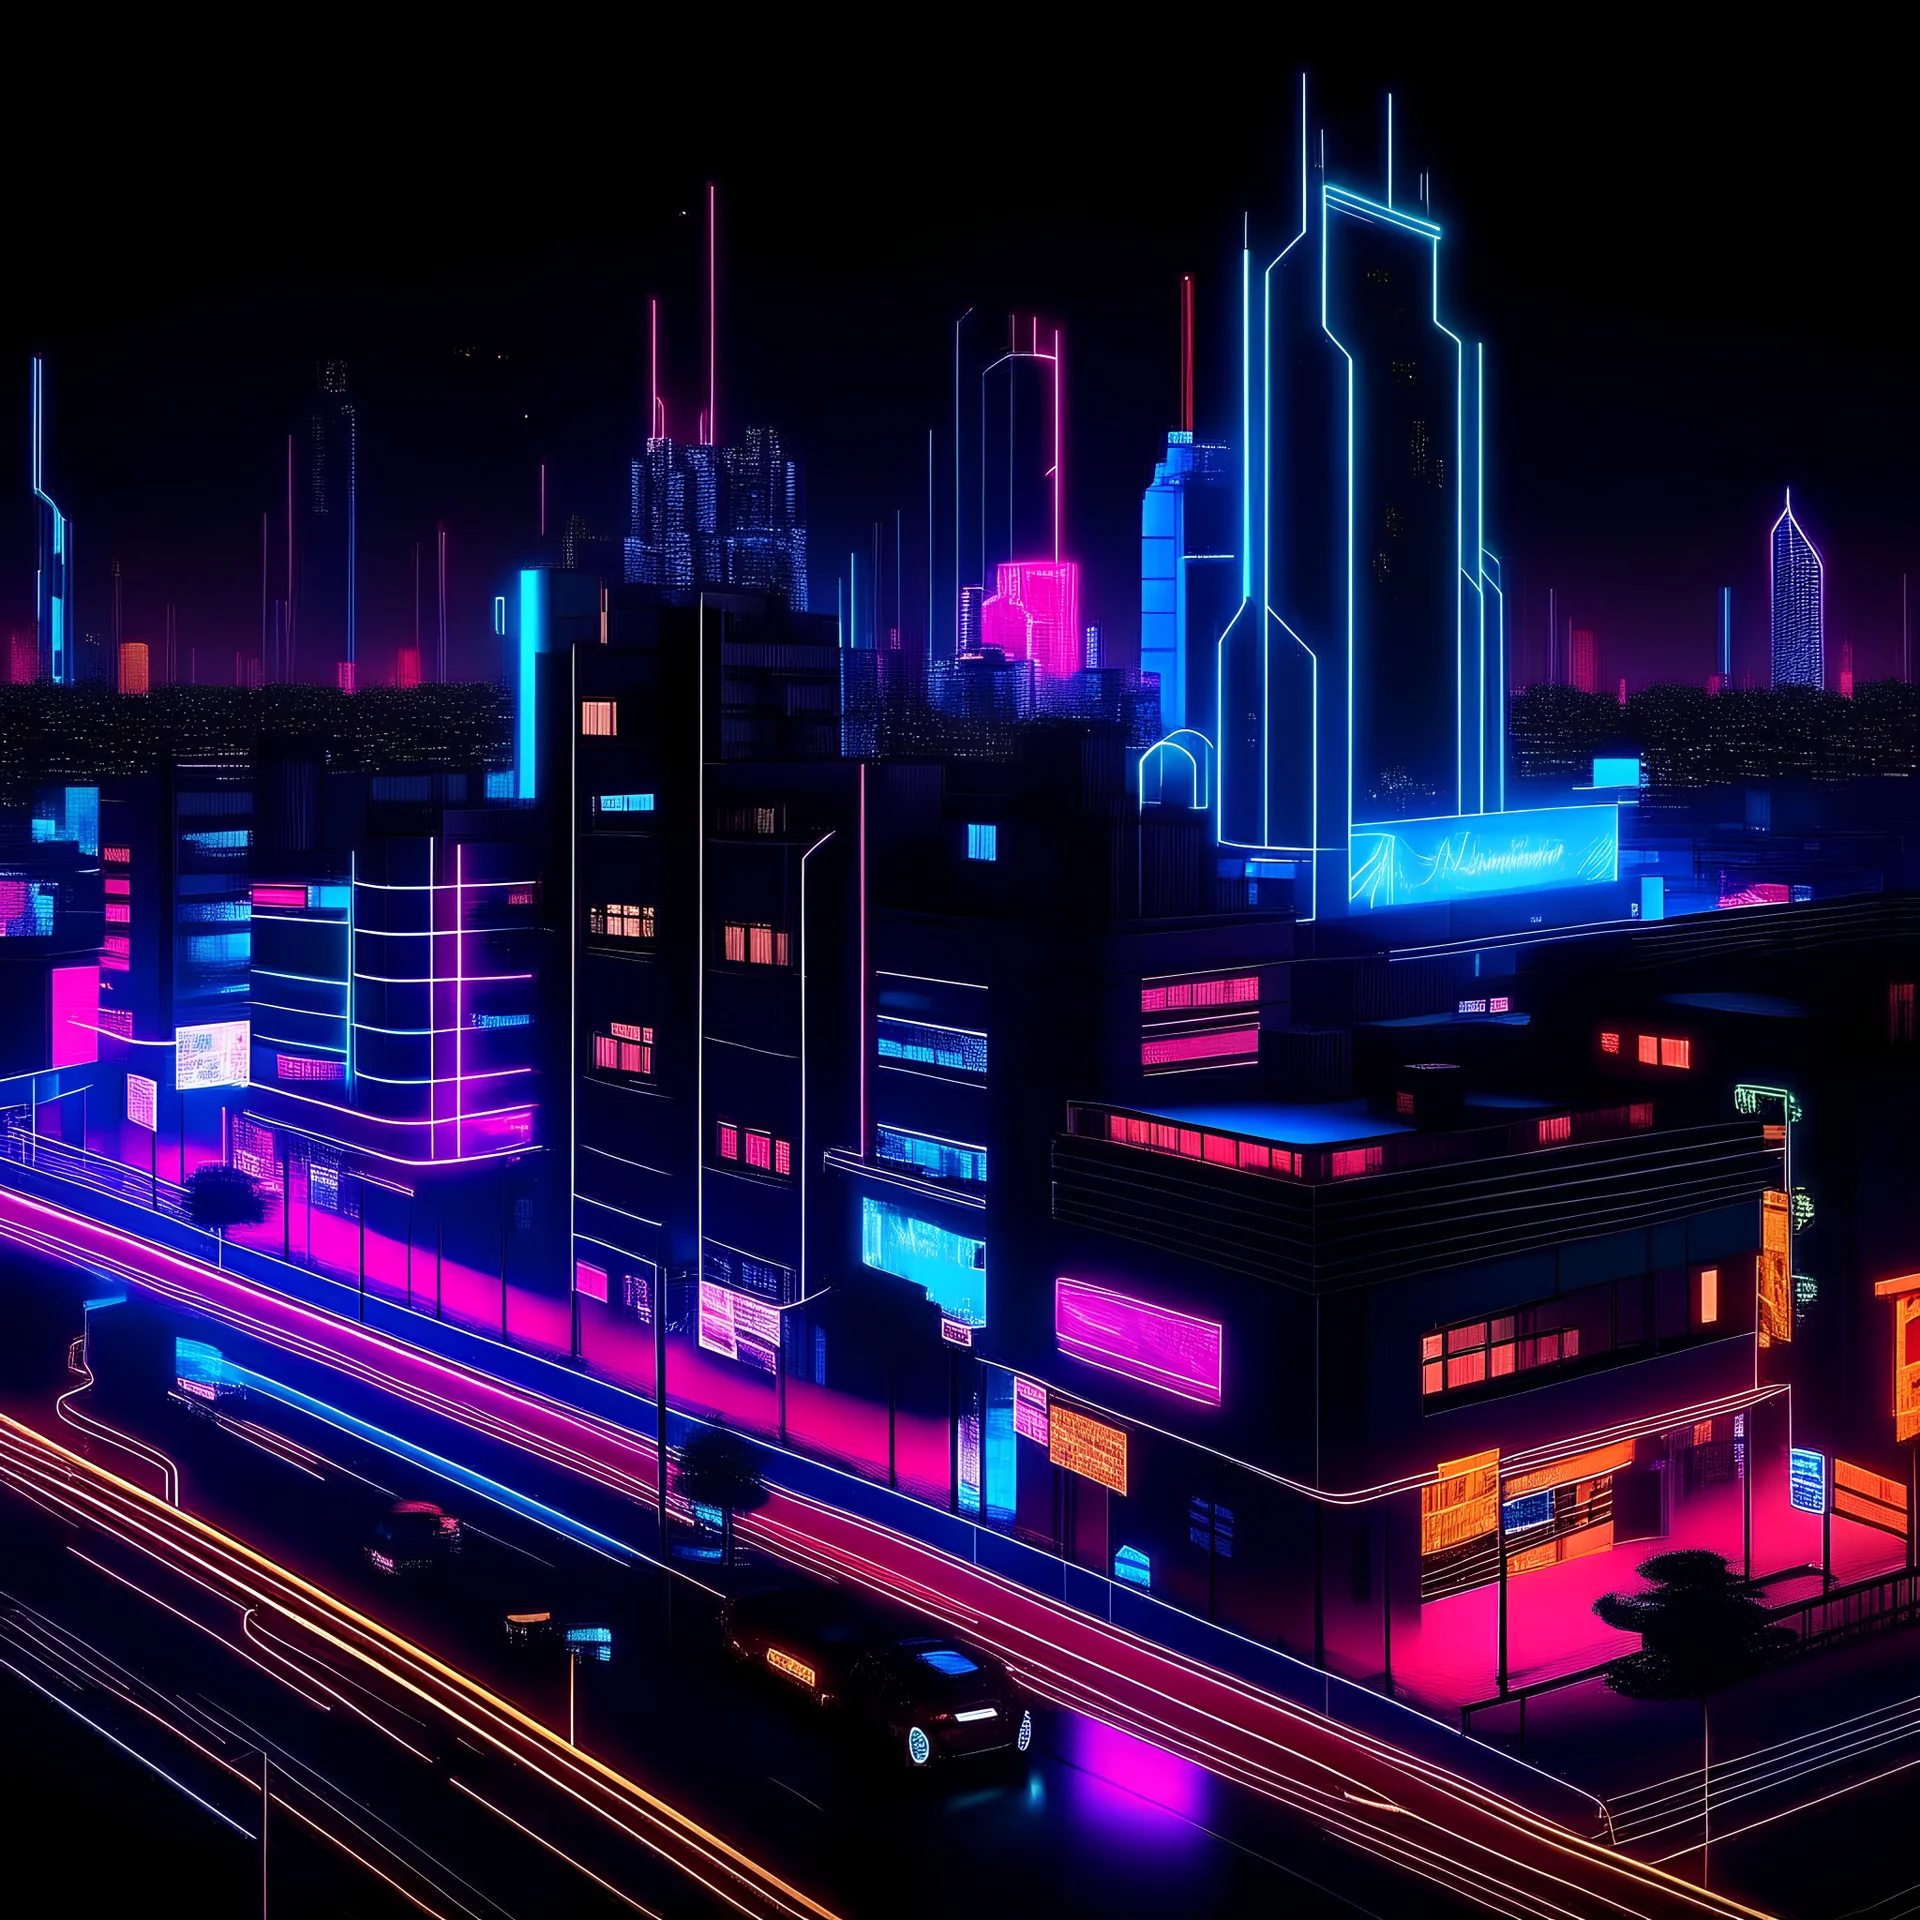 city scape at night with neon lights